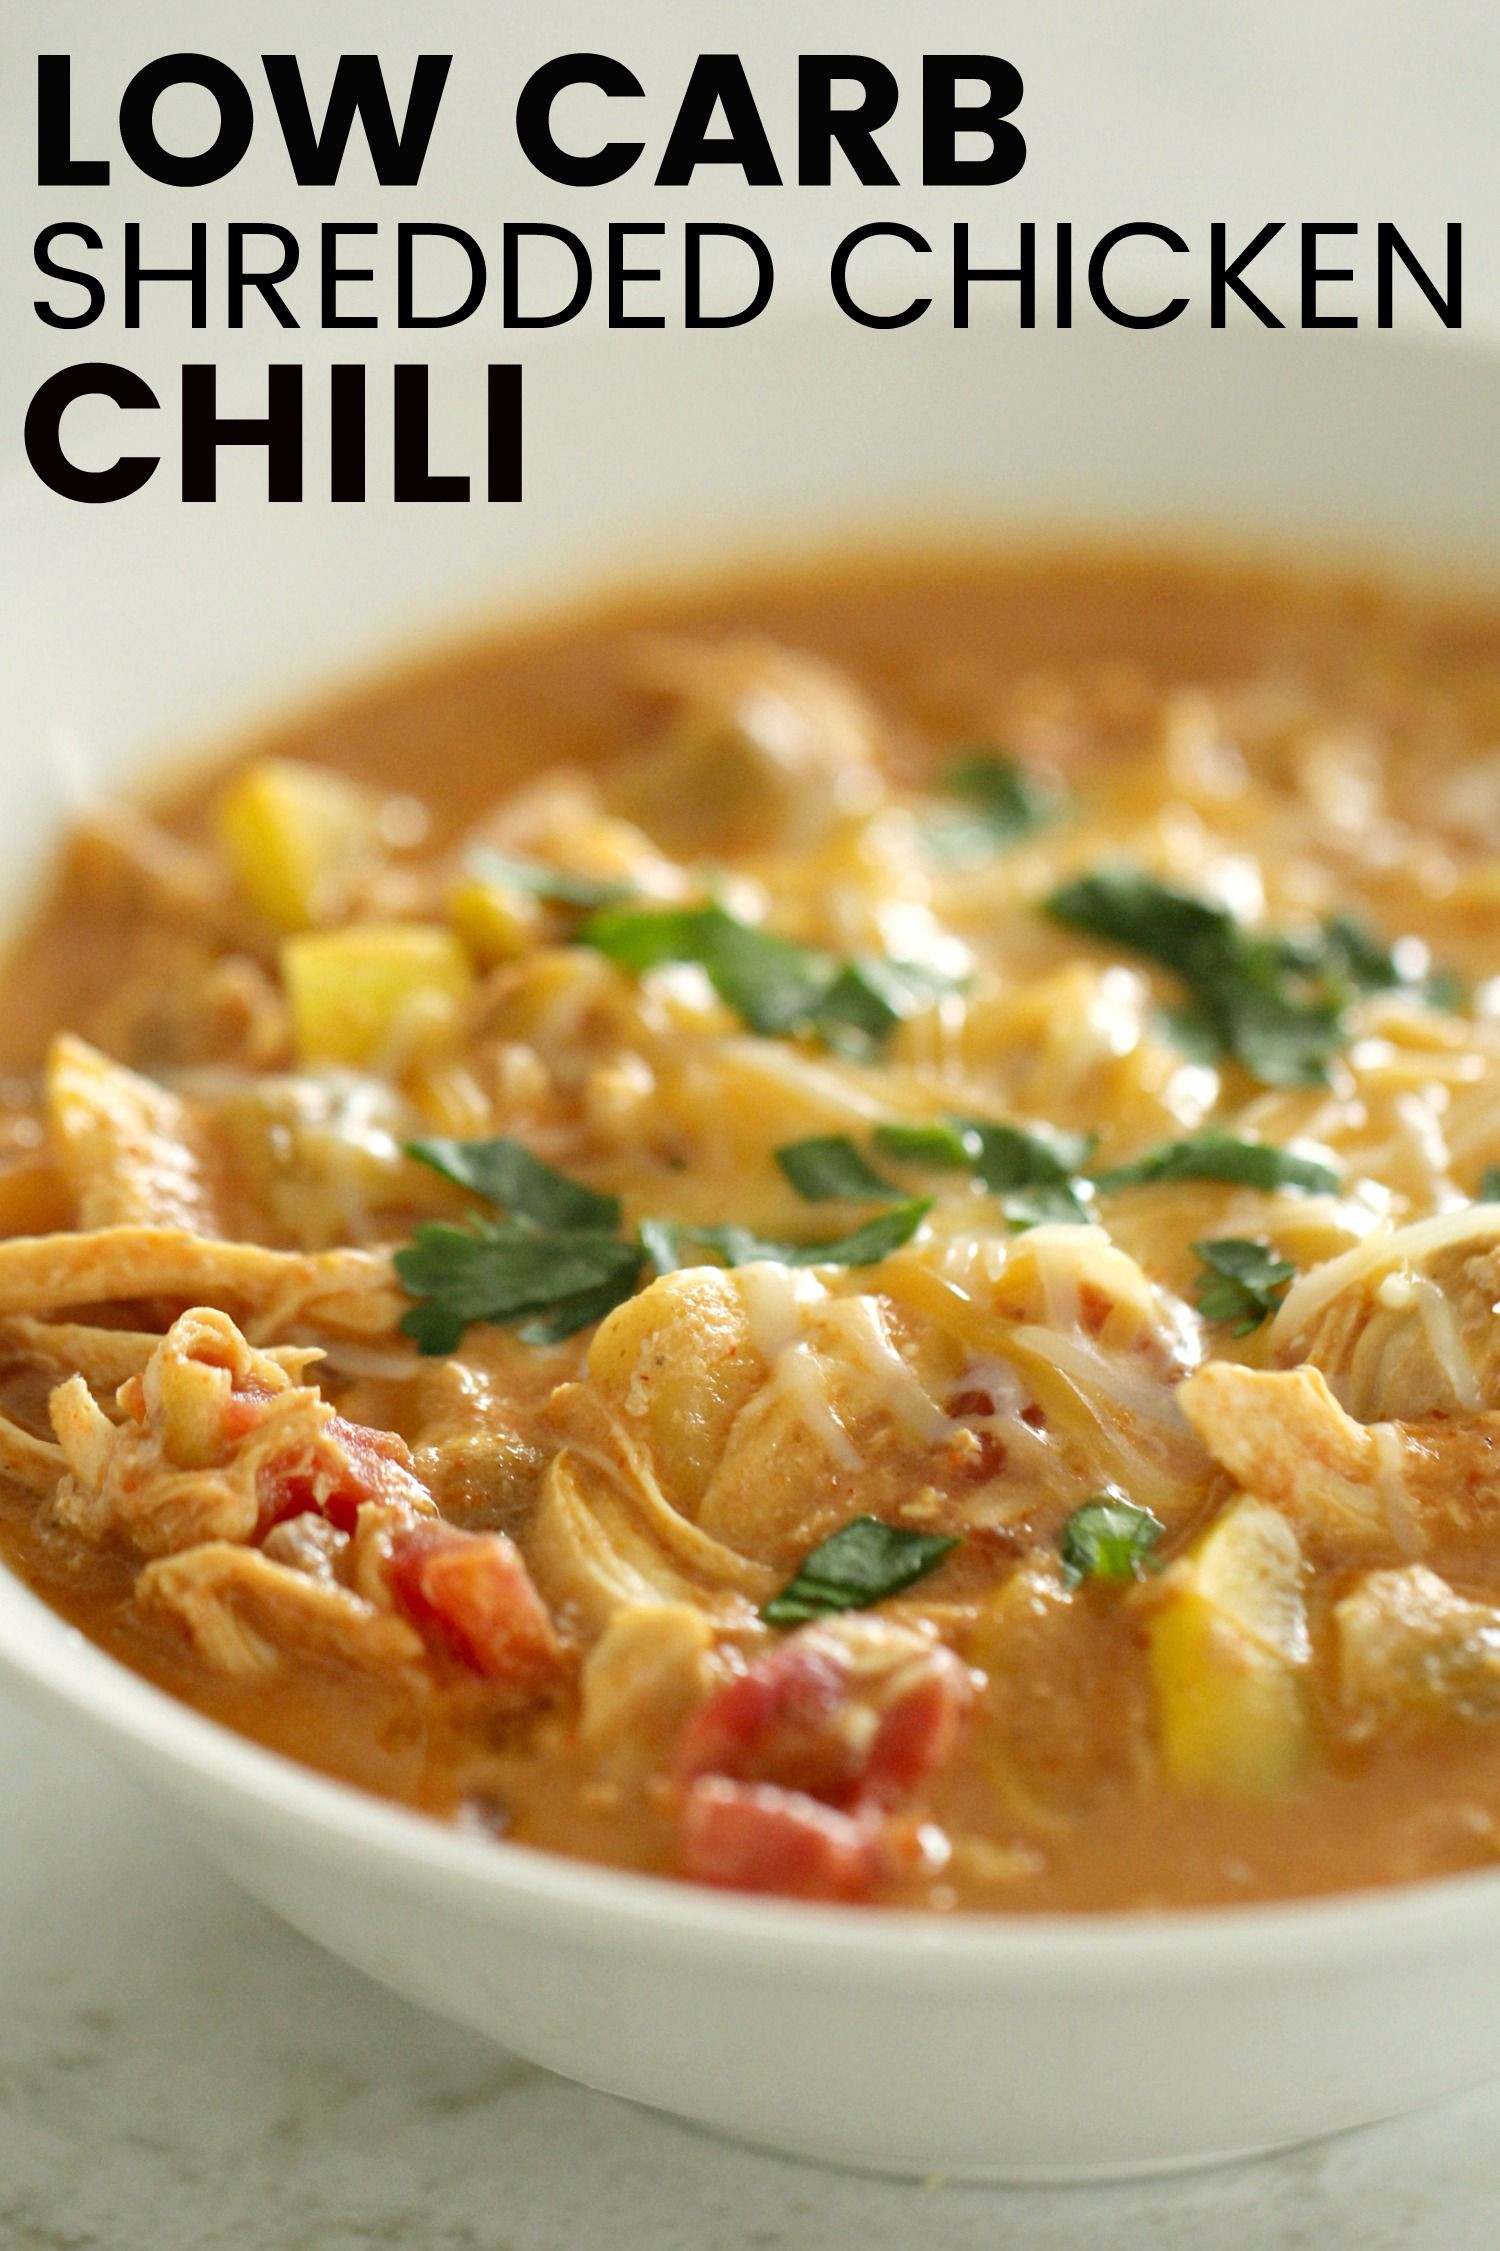 Low Carb Rotisserie Chicken Recipes Beautiful Low Carb Shredded Rotisserie Chicken Chili